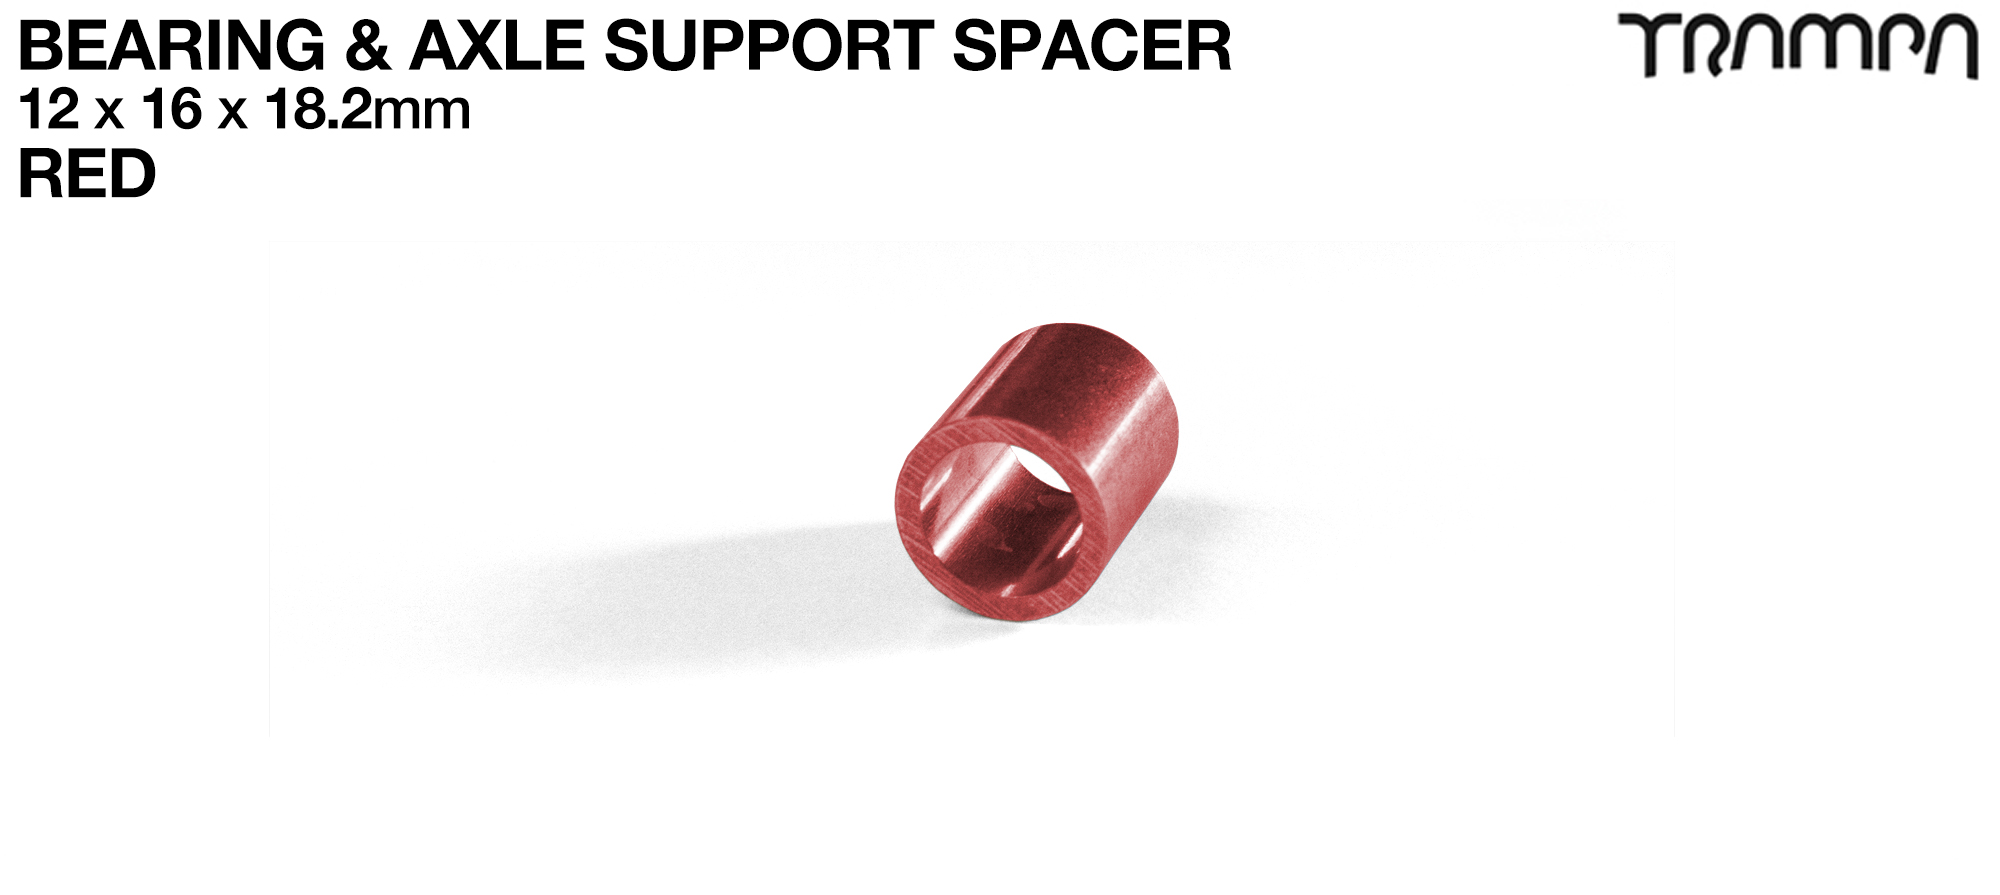 18.2mm Wheel Support Spacers - RED 